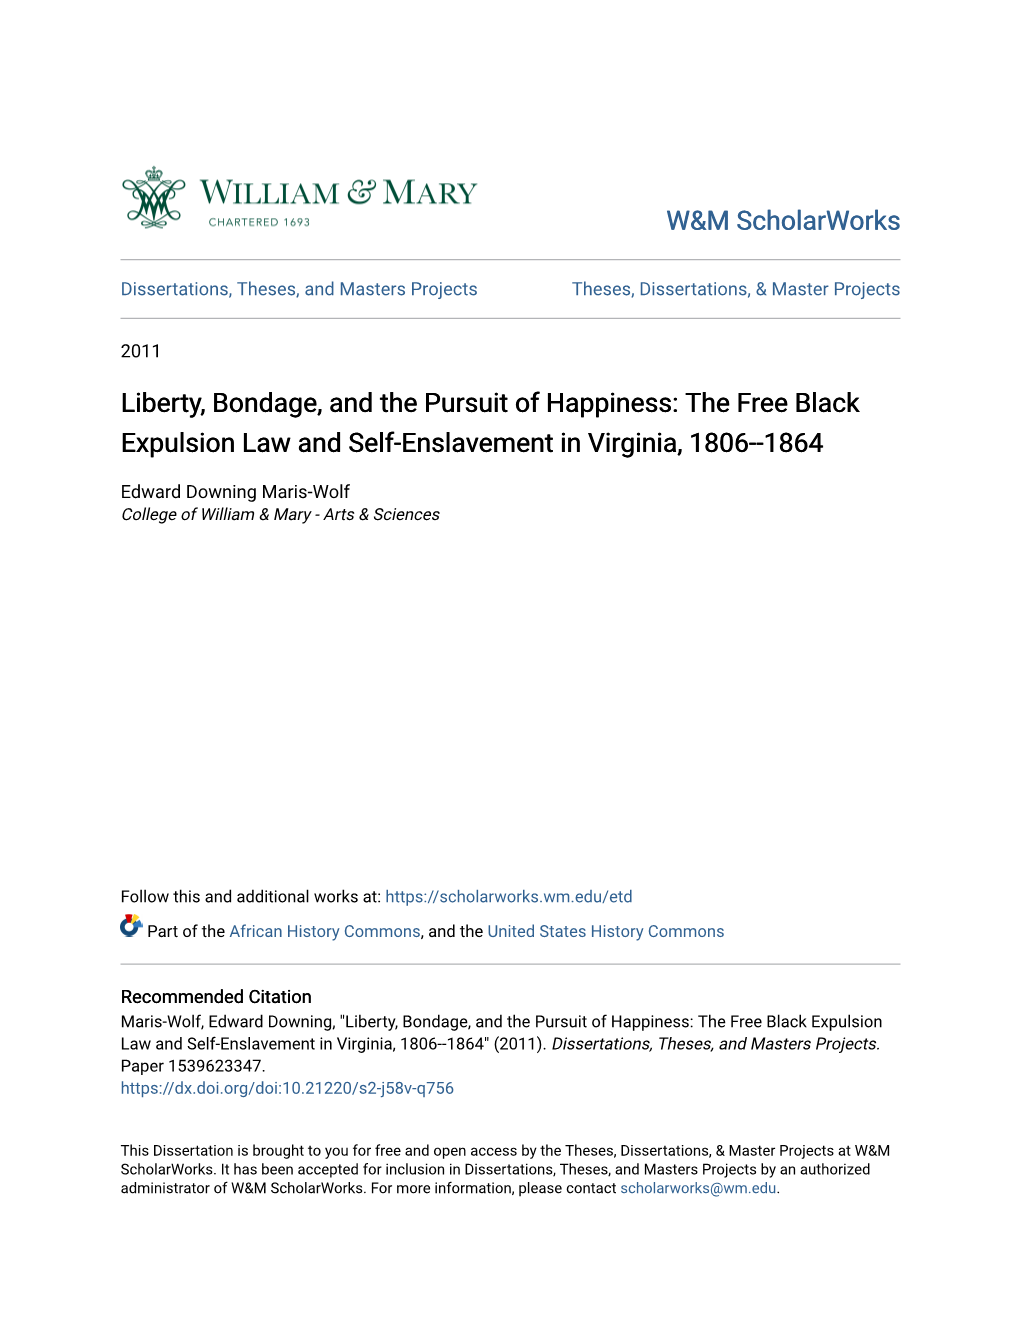 Liberty, Bondage, and the Pursuit of Happiness: the Free Black Expulsion Law and Self-Enslavement in Virginia, 1806--1864